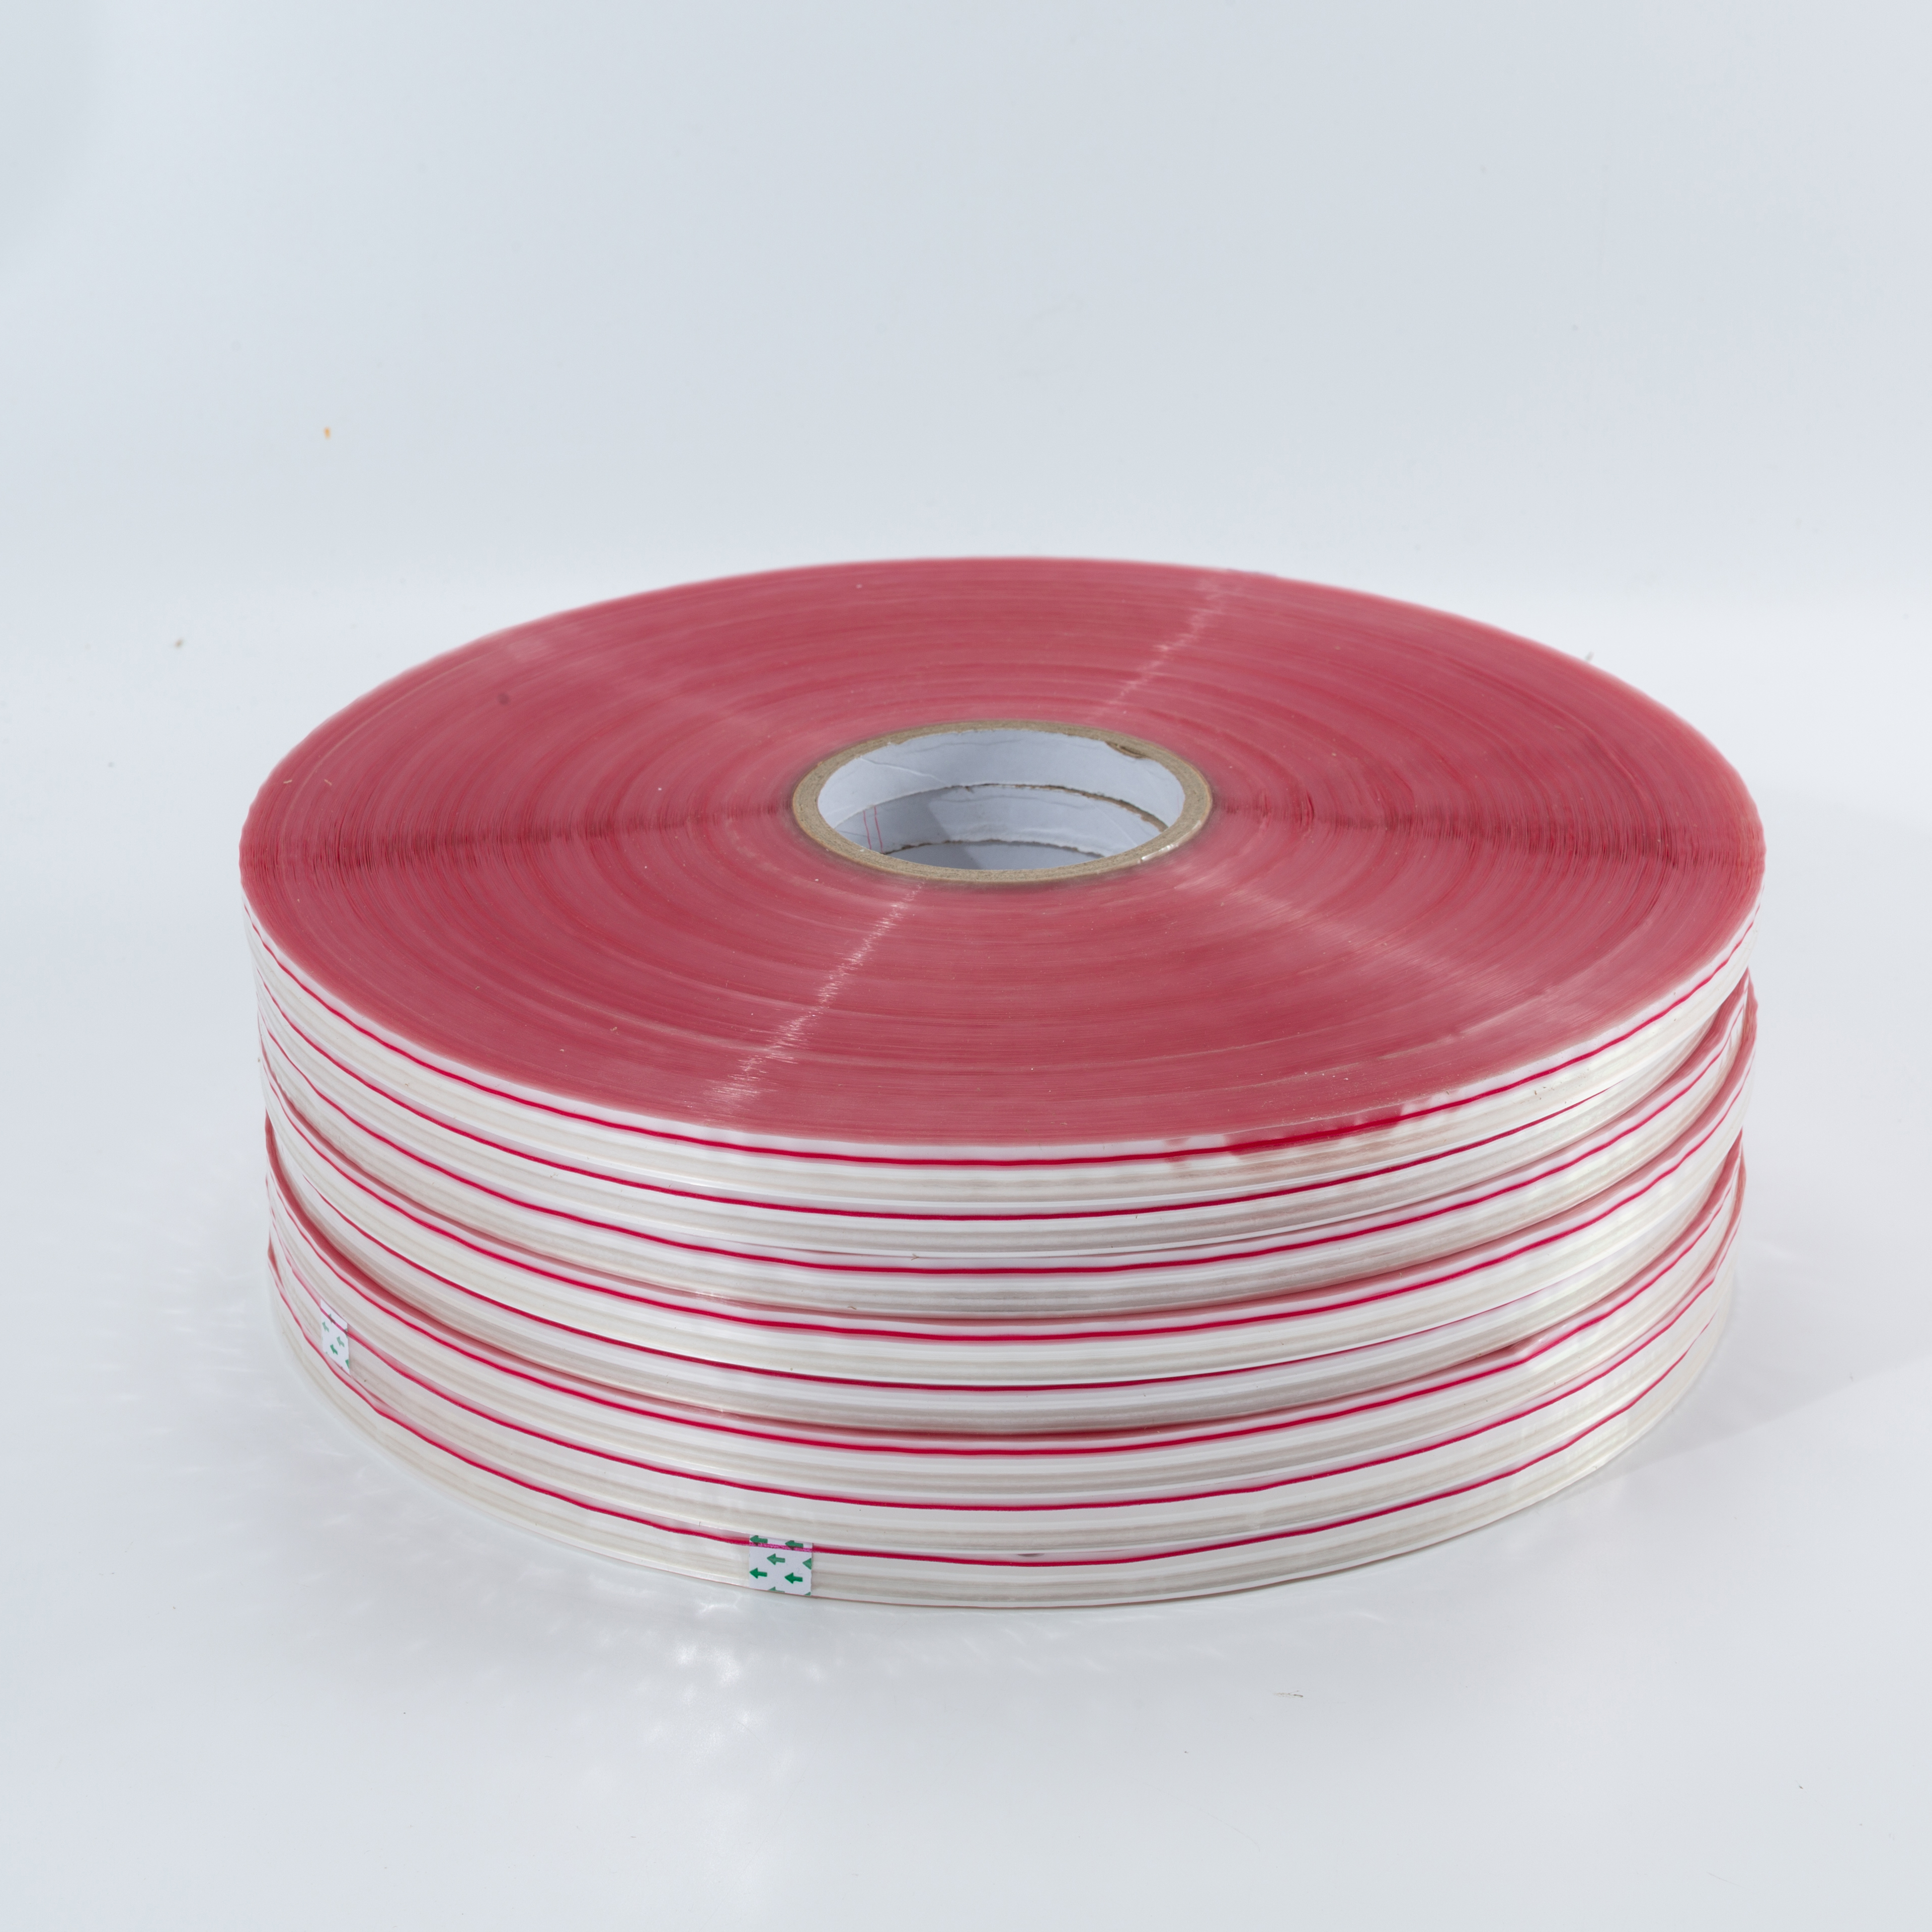 OPP Transparent Adhesive Double Side Bag Sealing Tape